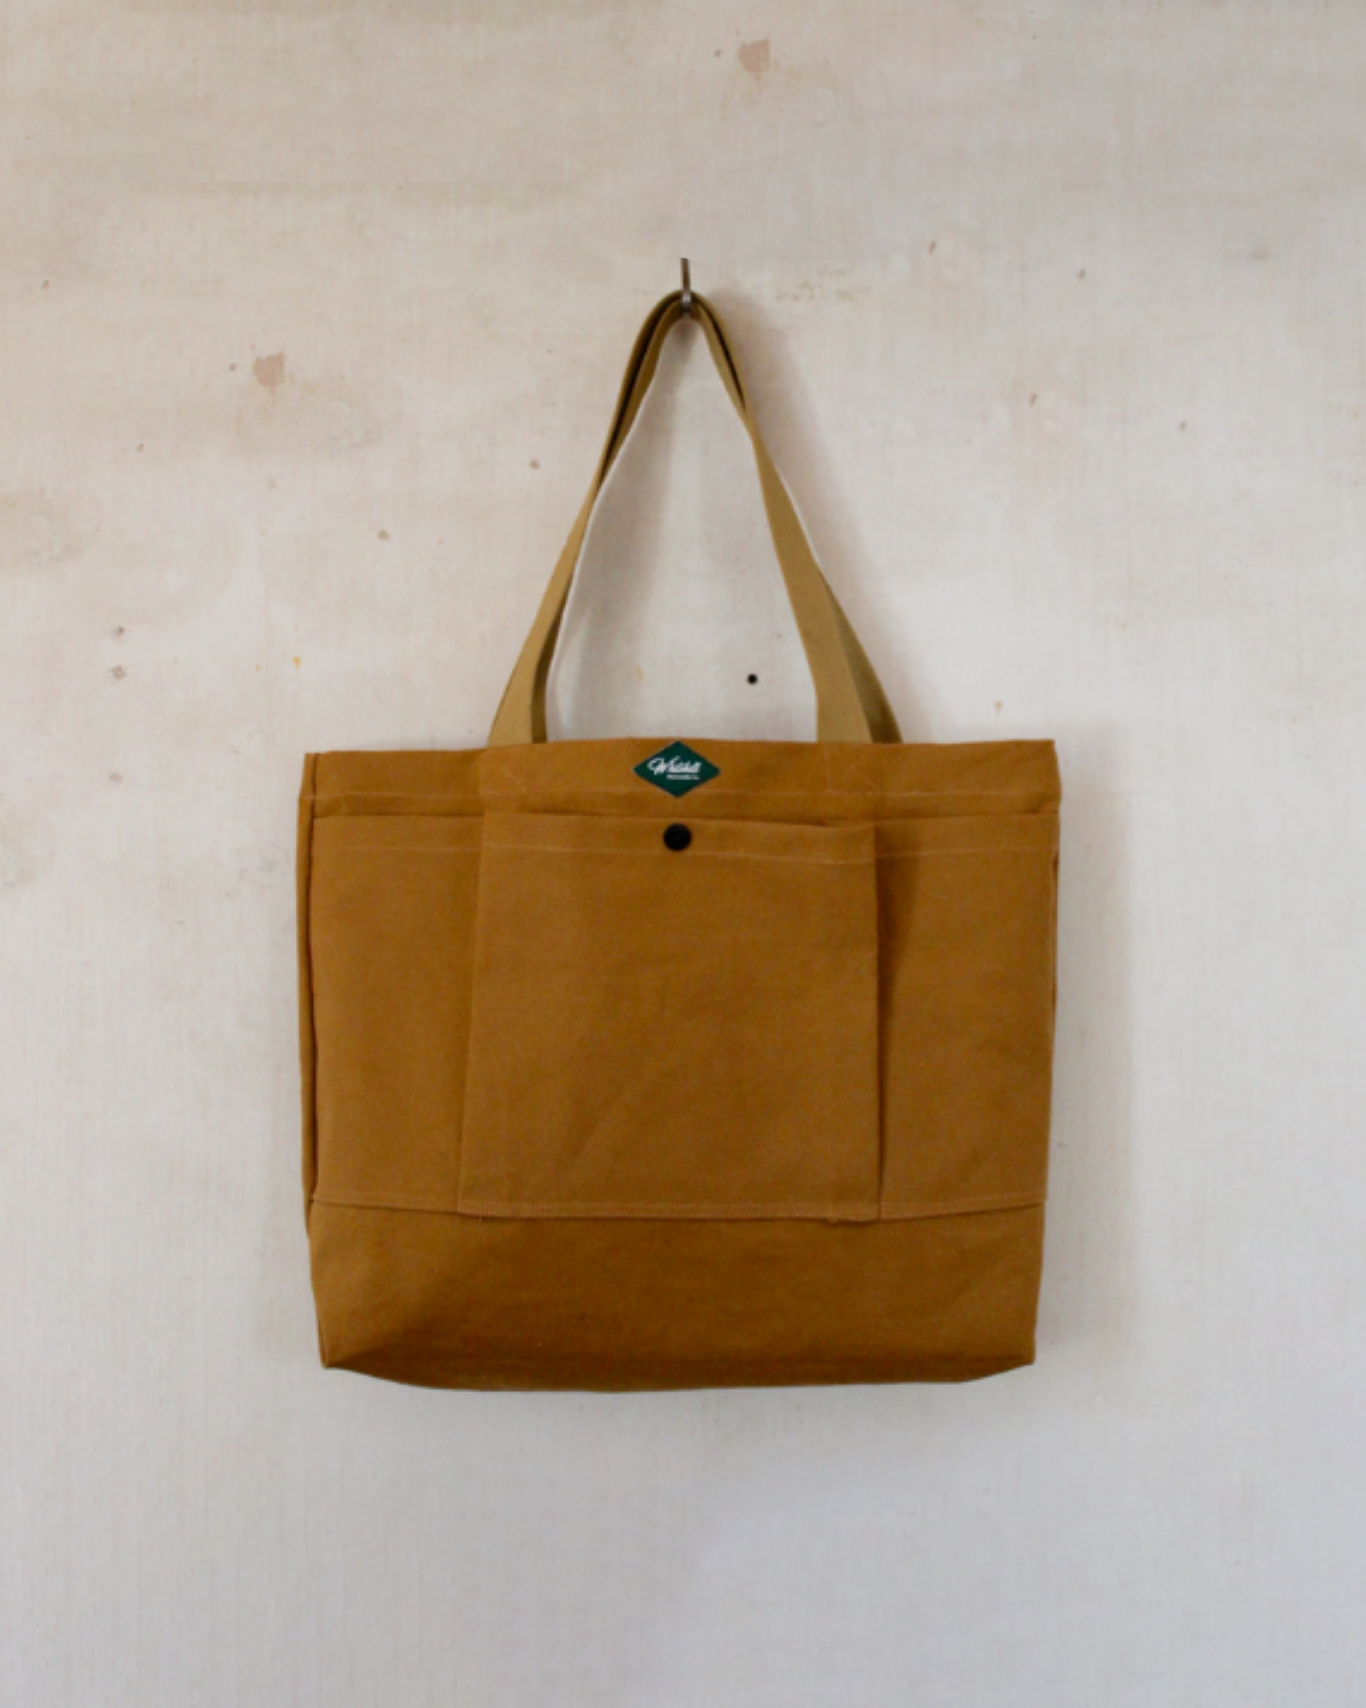 Worker Tote